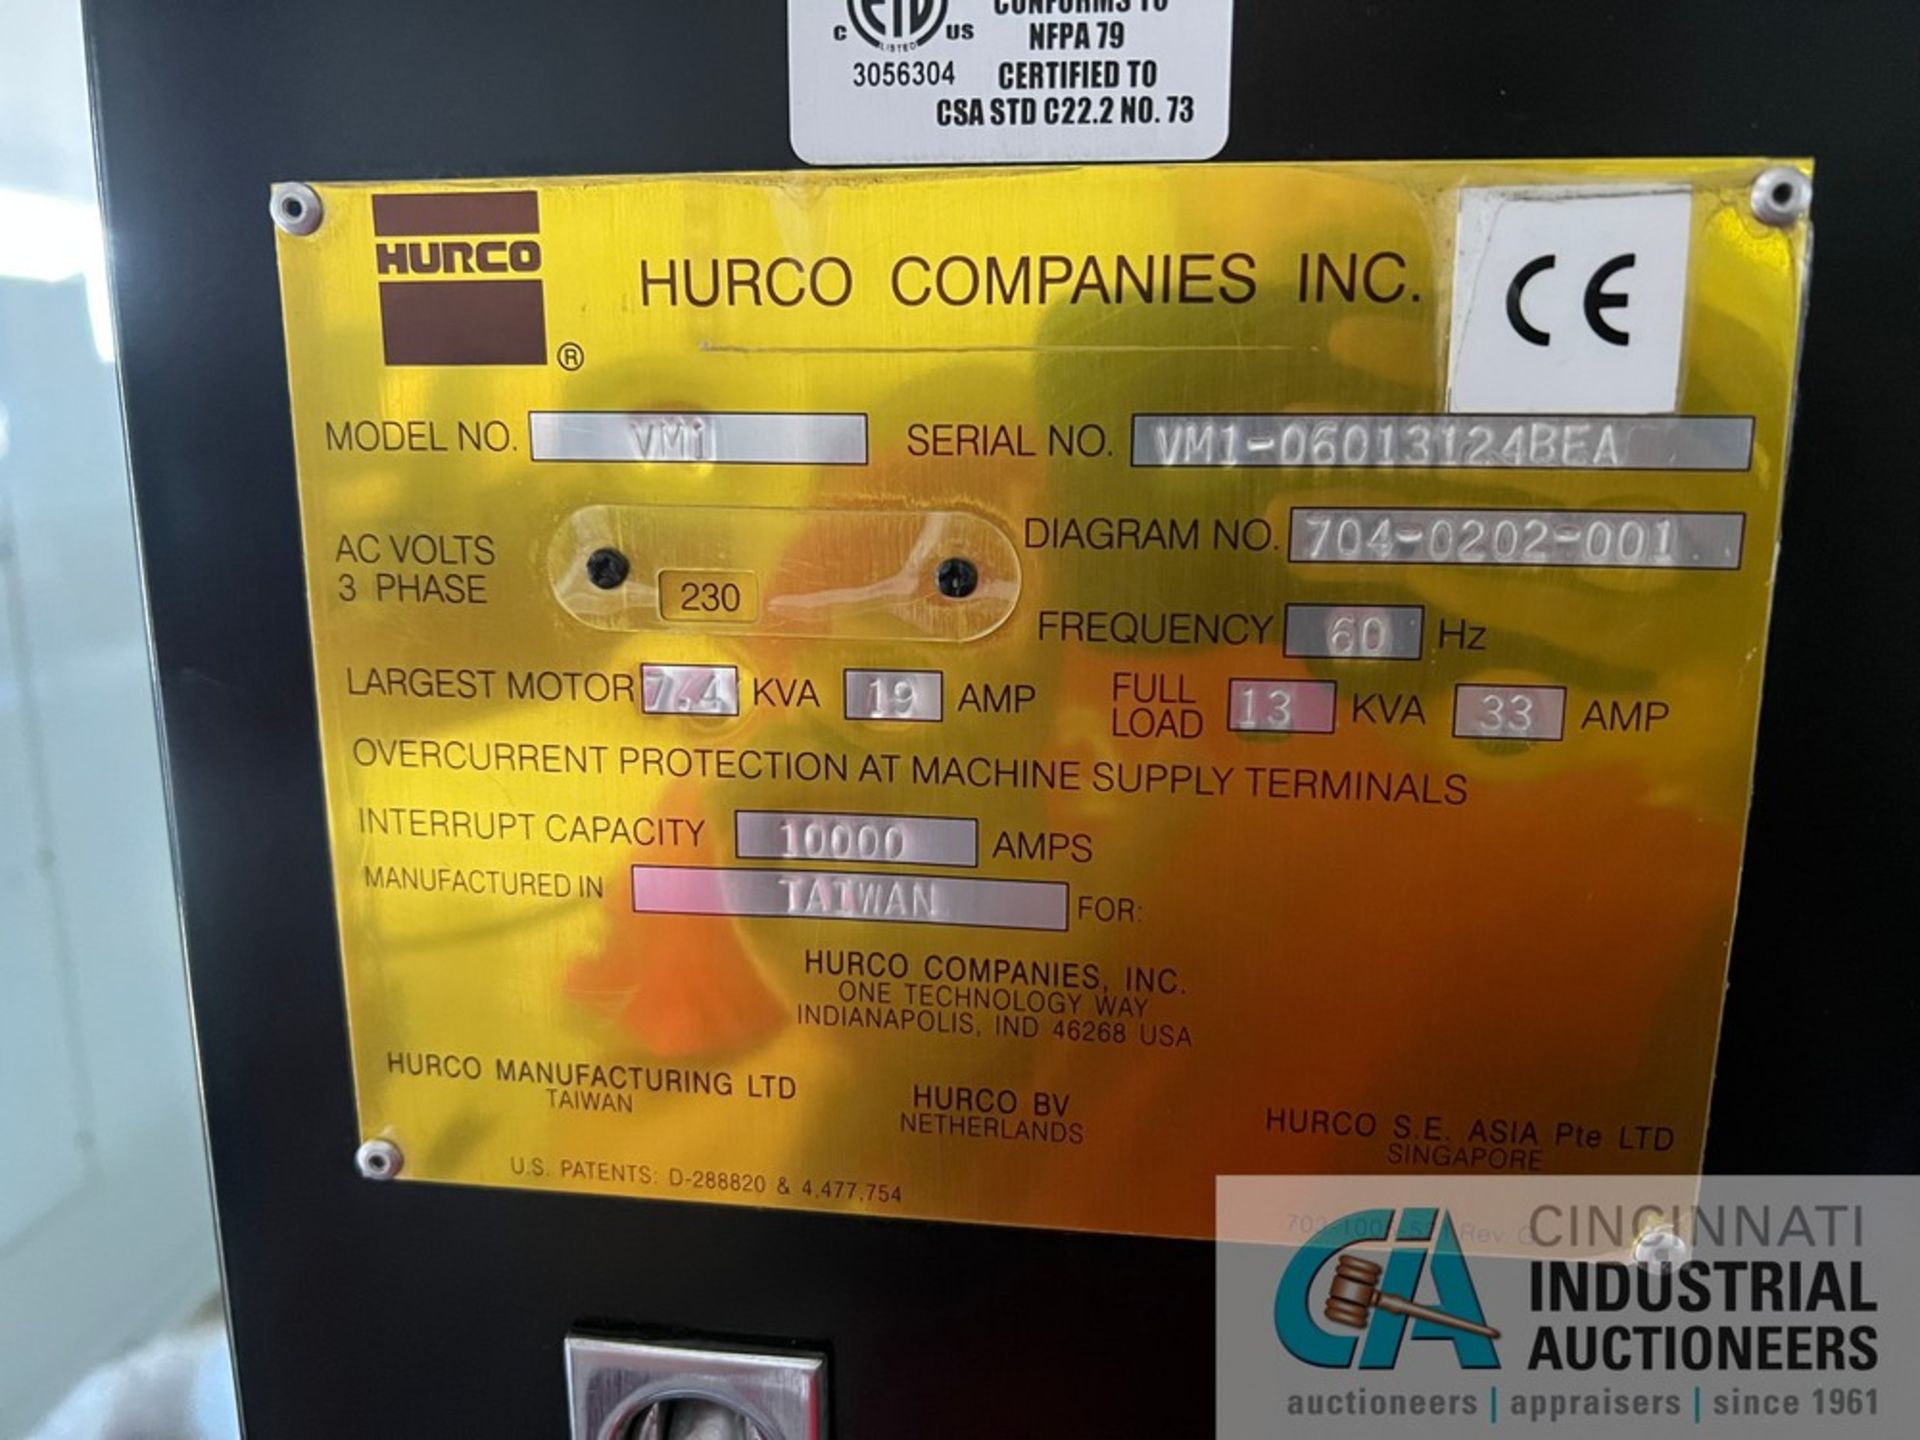 HURCO MODEL VM1 CNC VERTICAL MACHINING CENTER; S/N 06013124BEA, 8,000 RPM SPINDLE, 40 TAPER (2004) - Image 10 of 17